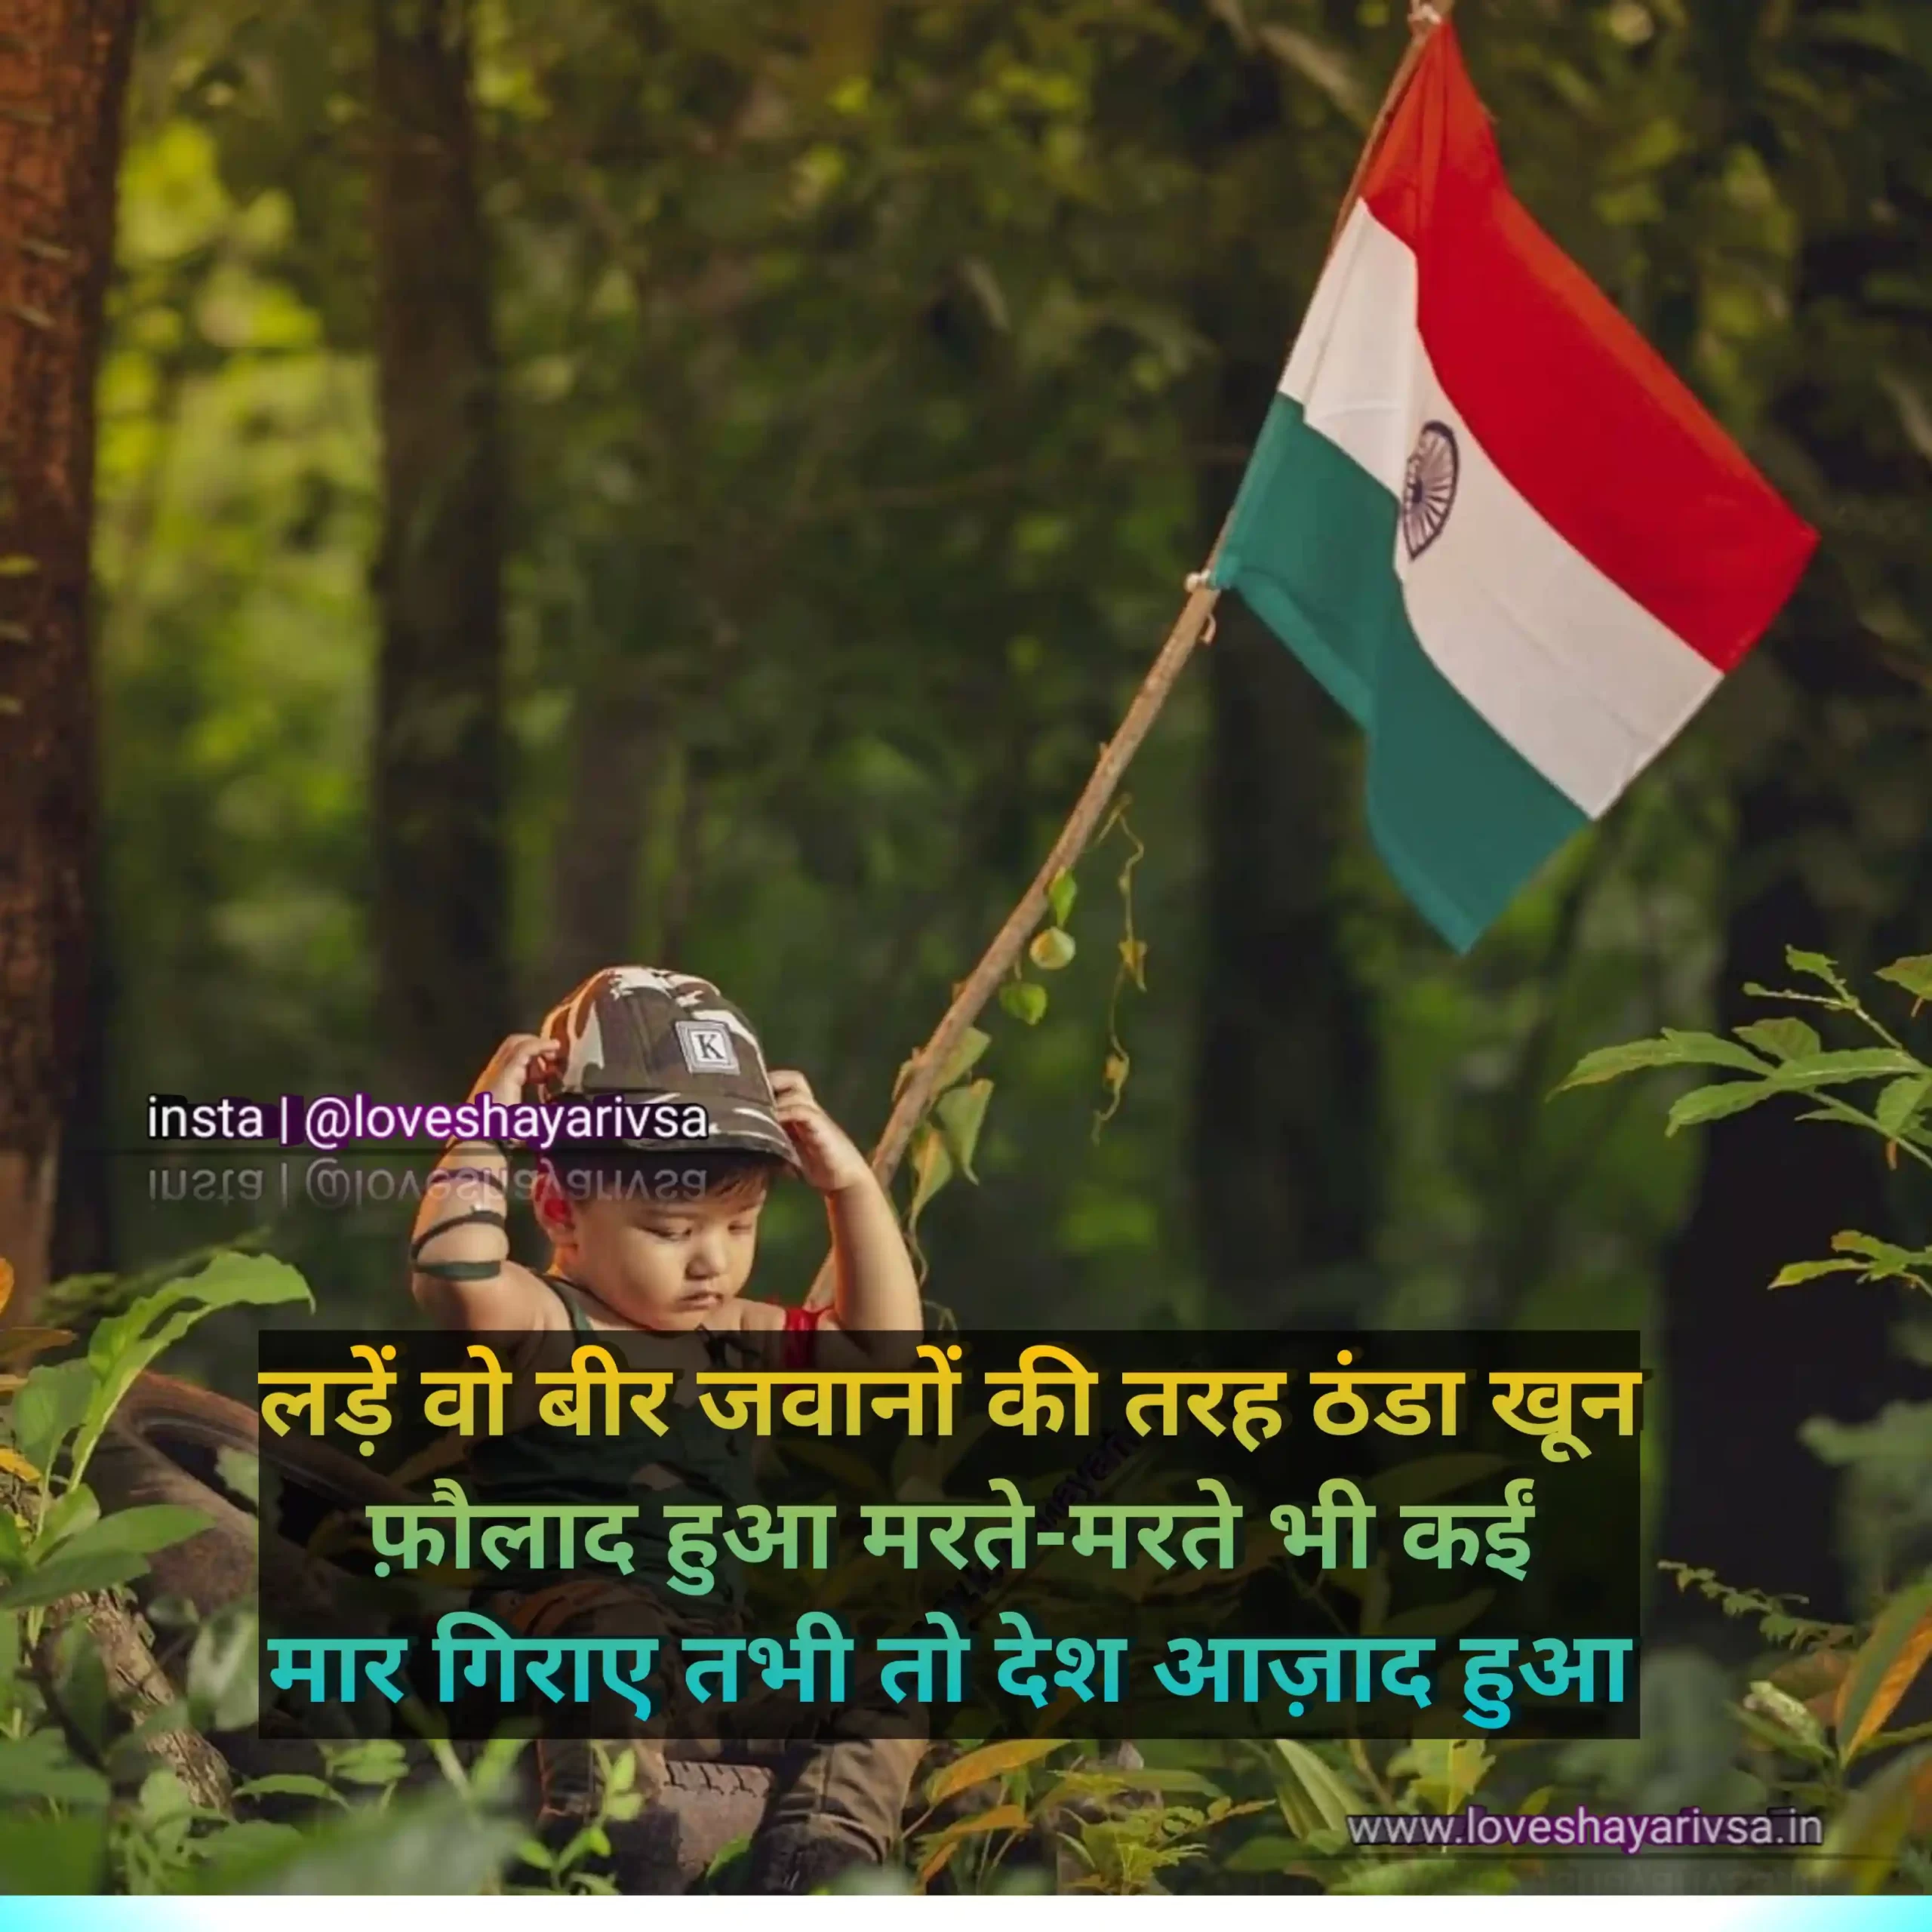 "A Young baby boy Wrapped in the Tricolor, Standing Tall as a Symbol of India's Bright Future and Aspirations on Independence Day ЁЯЗоЁЯЗ│тЬи #PatrioticYouth #FutureLeaders"